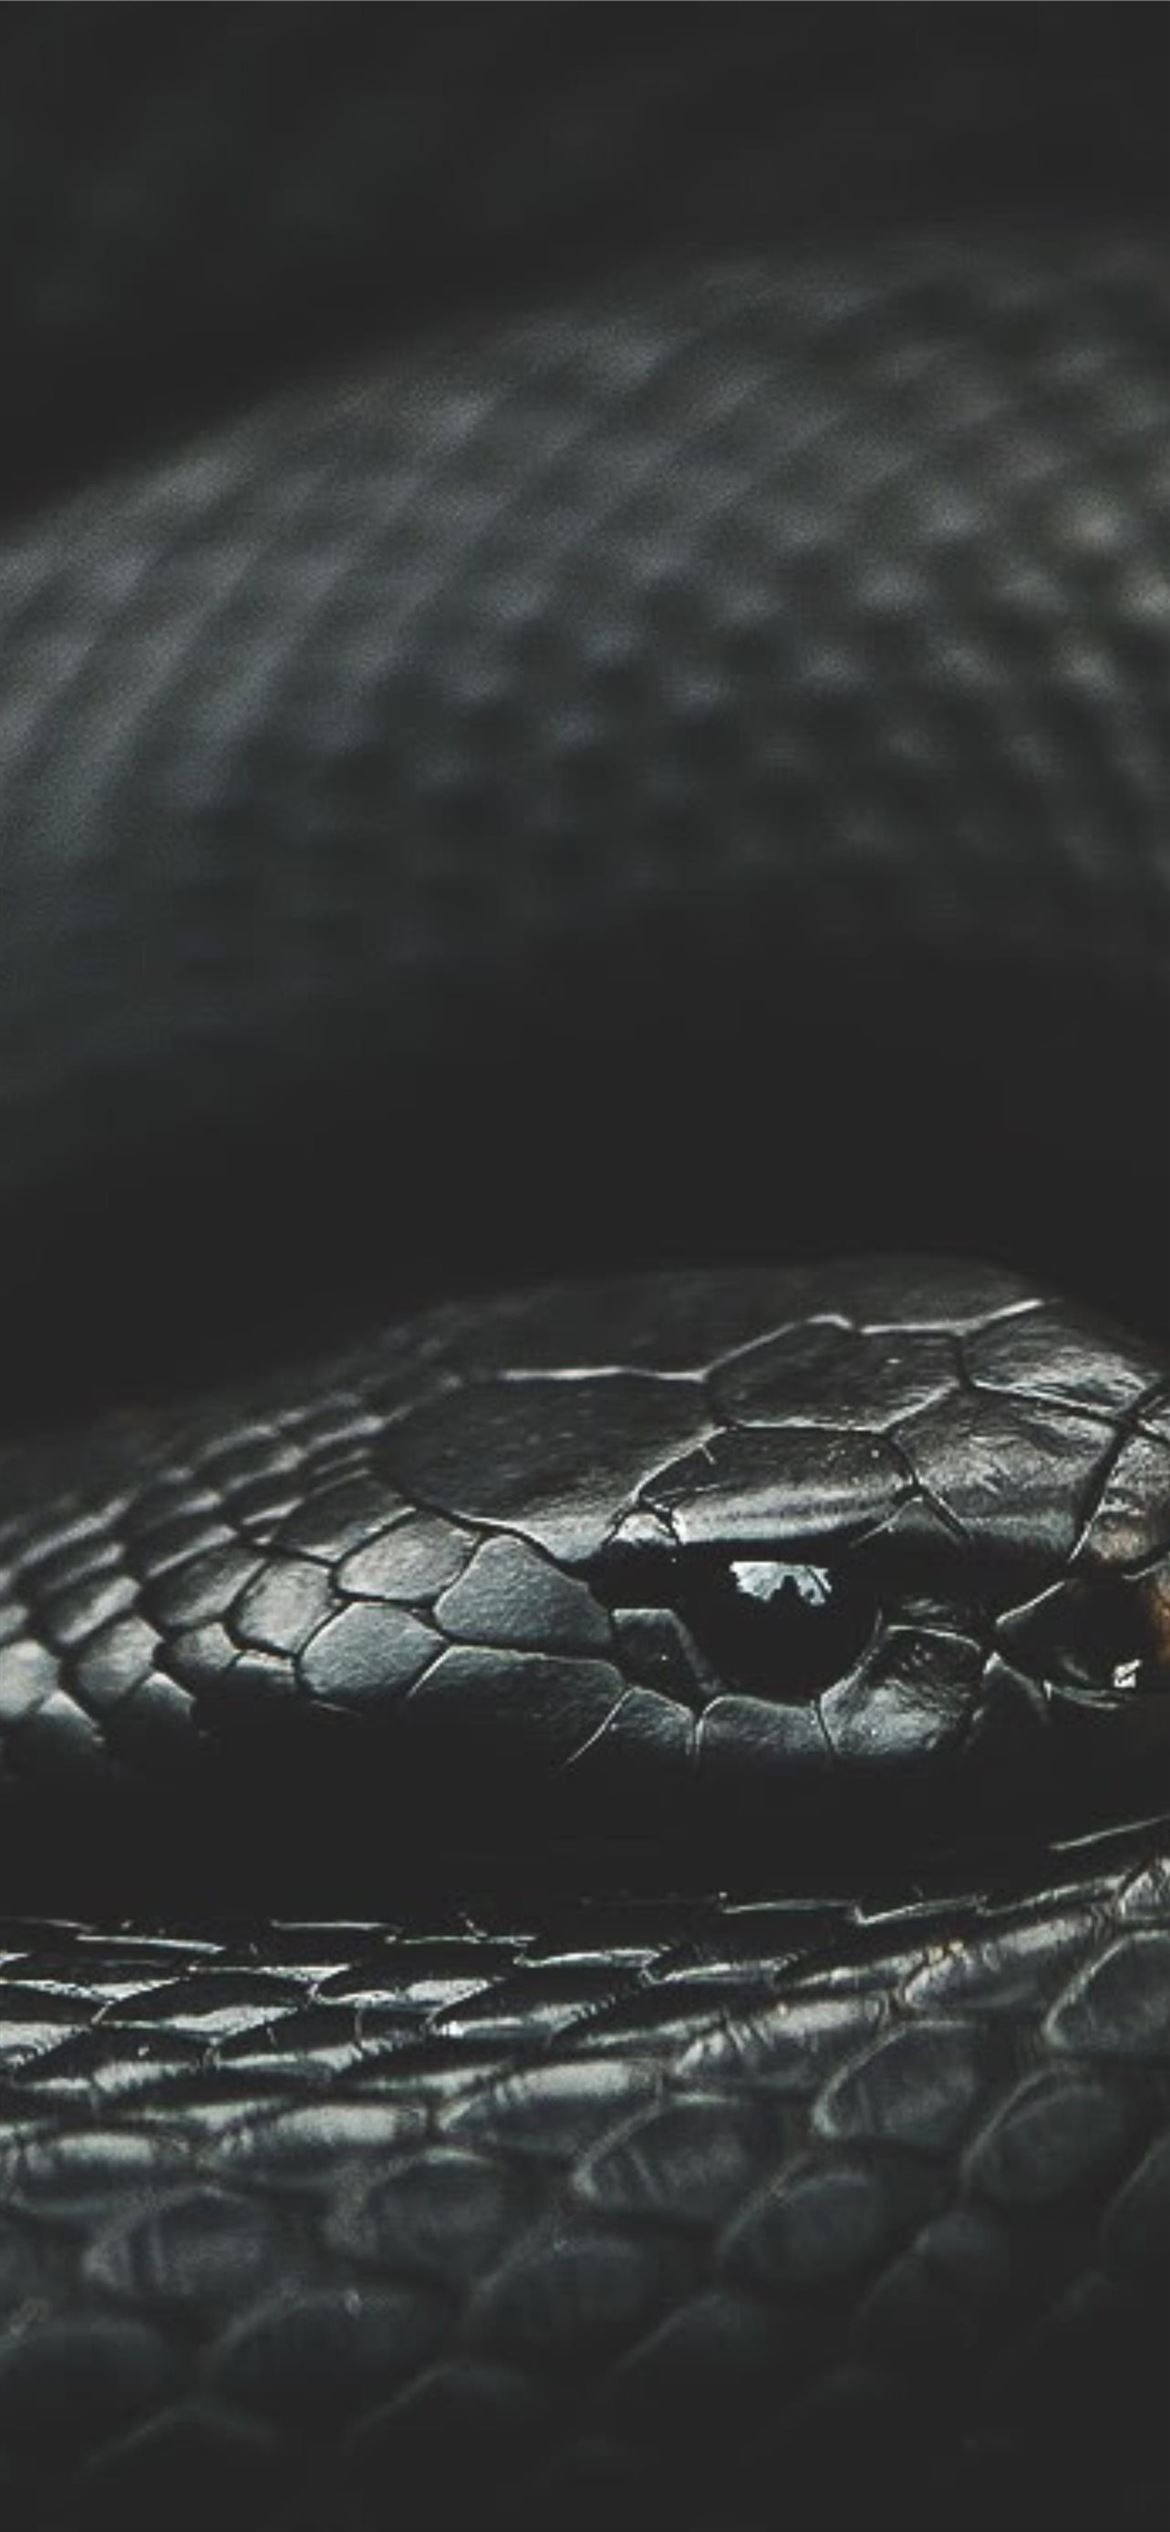 A black snake is curled up in the dark - Snake